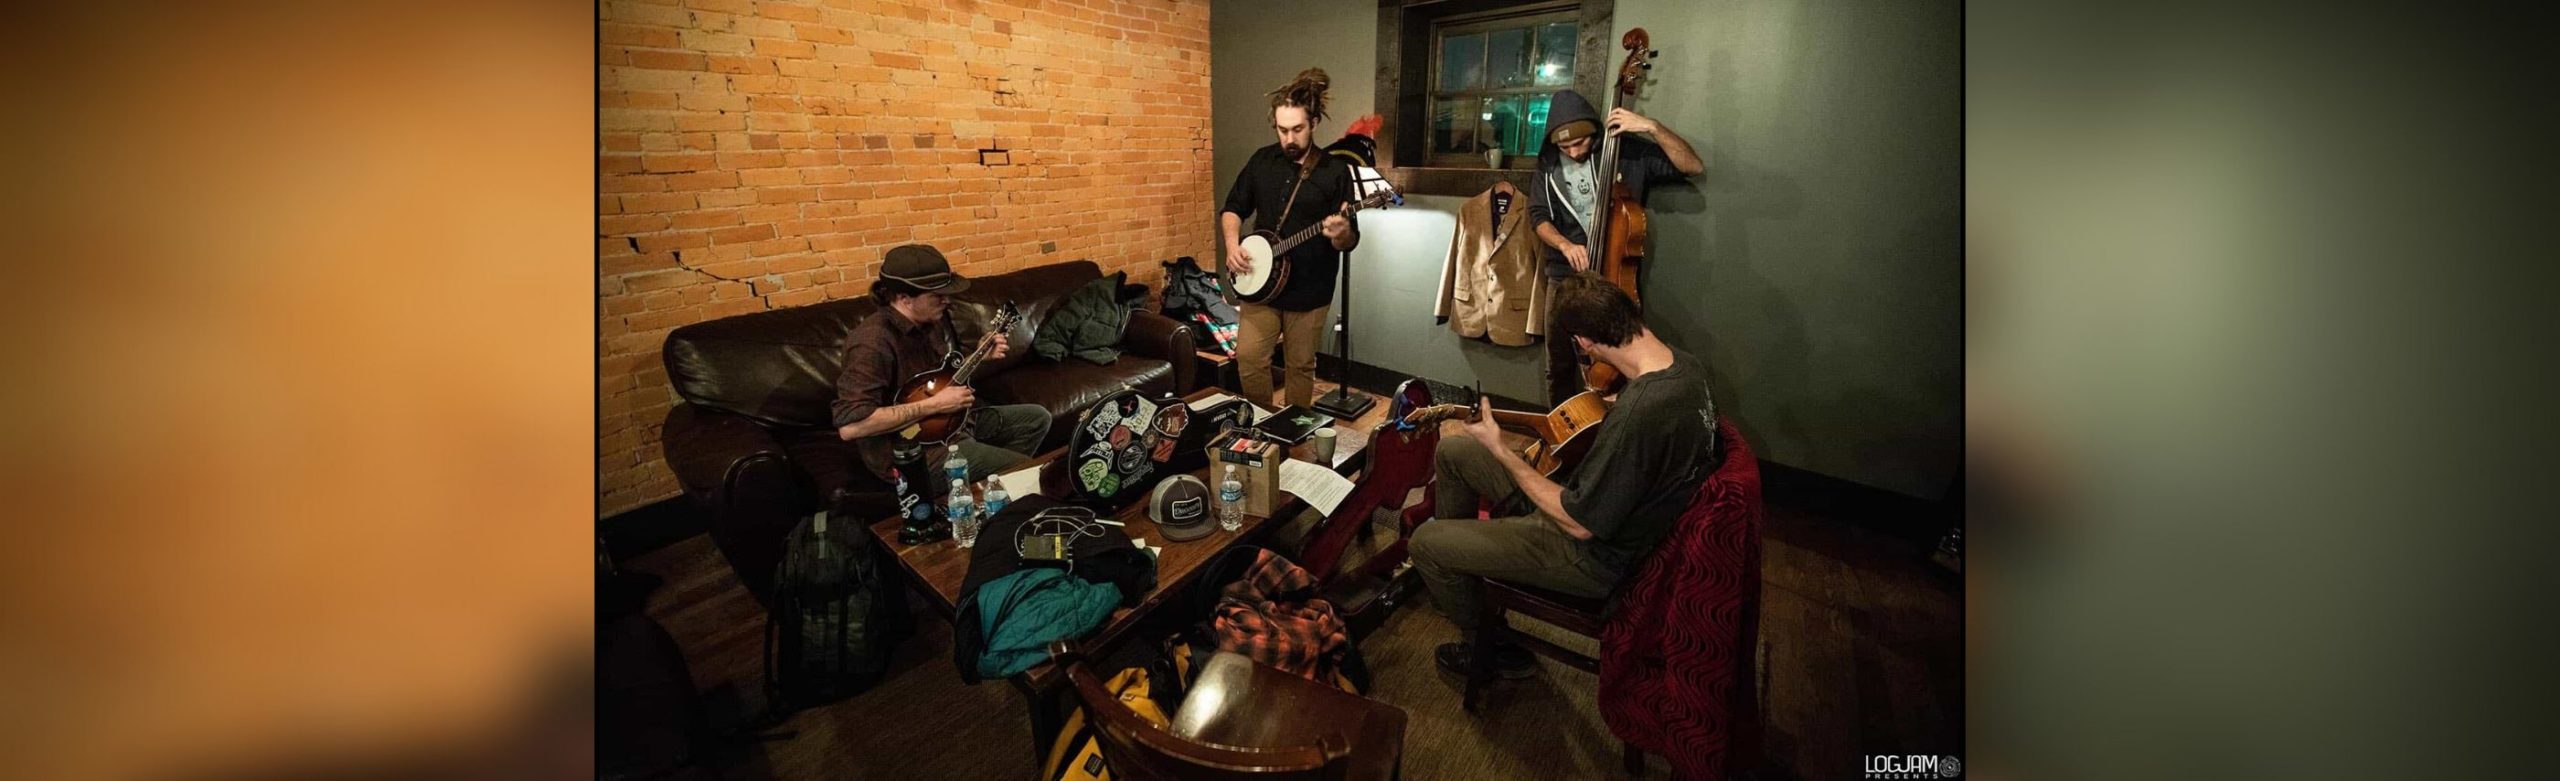 The Seed: Kitchen Dwellers Go From Local Picking to National Touring (Q&A) Image